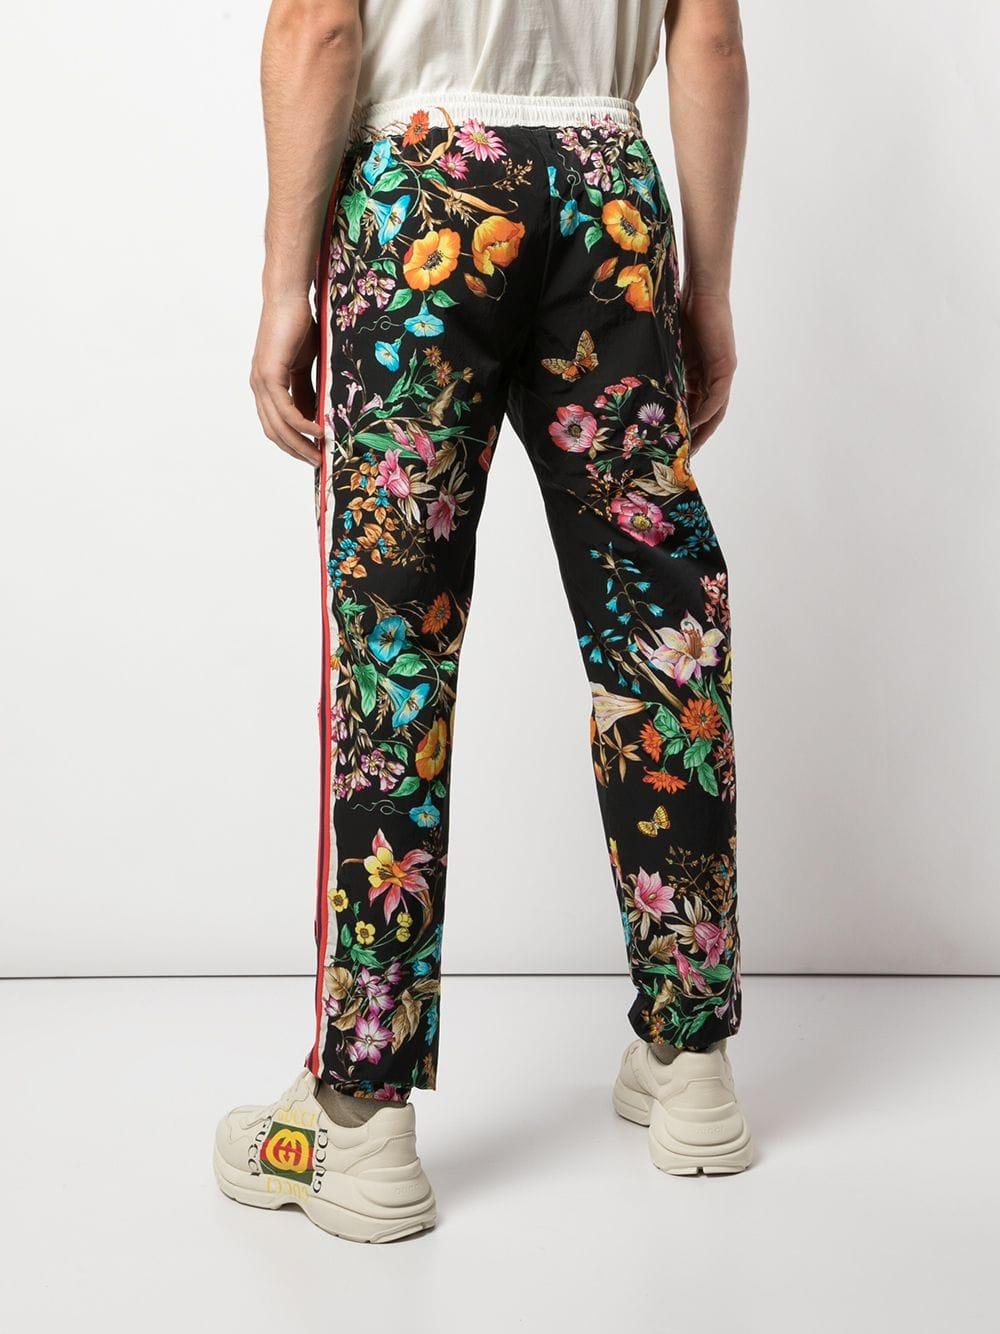 RUST, BLUE AND RED FLORAL PANTS – ShopKoai